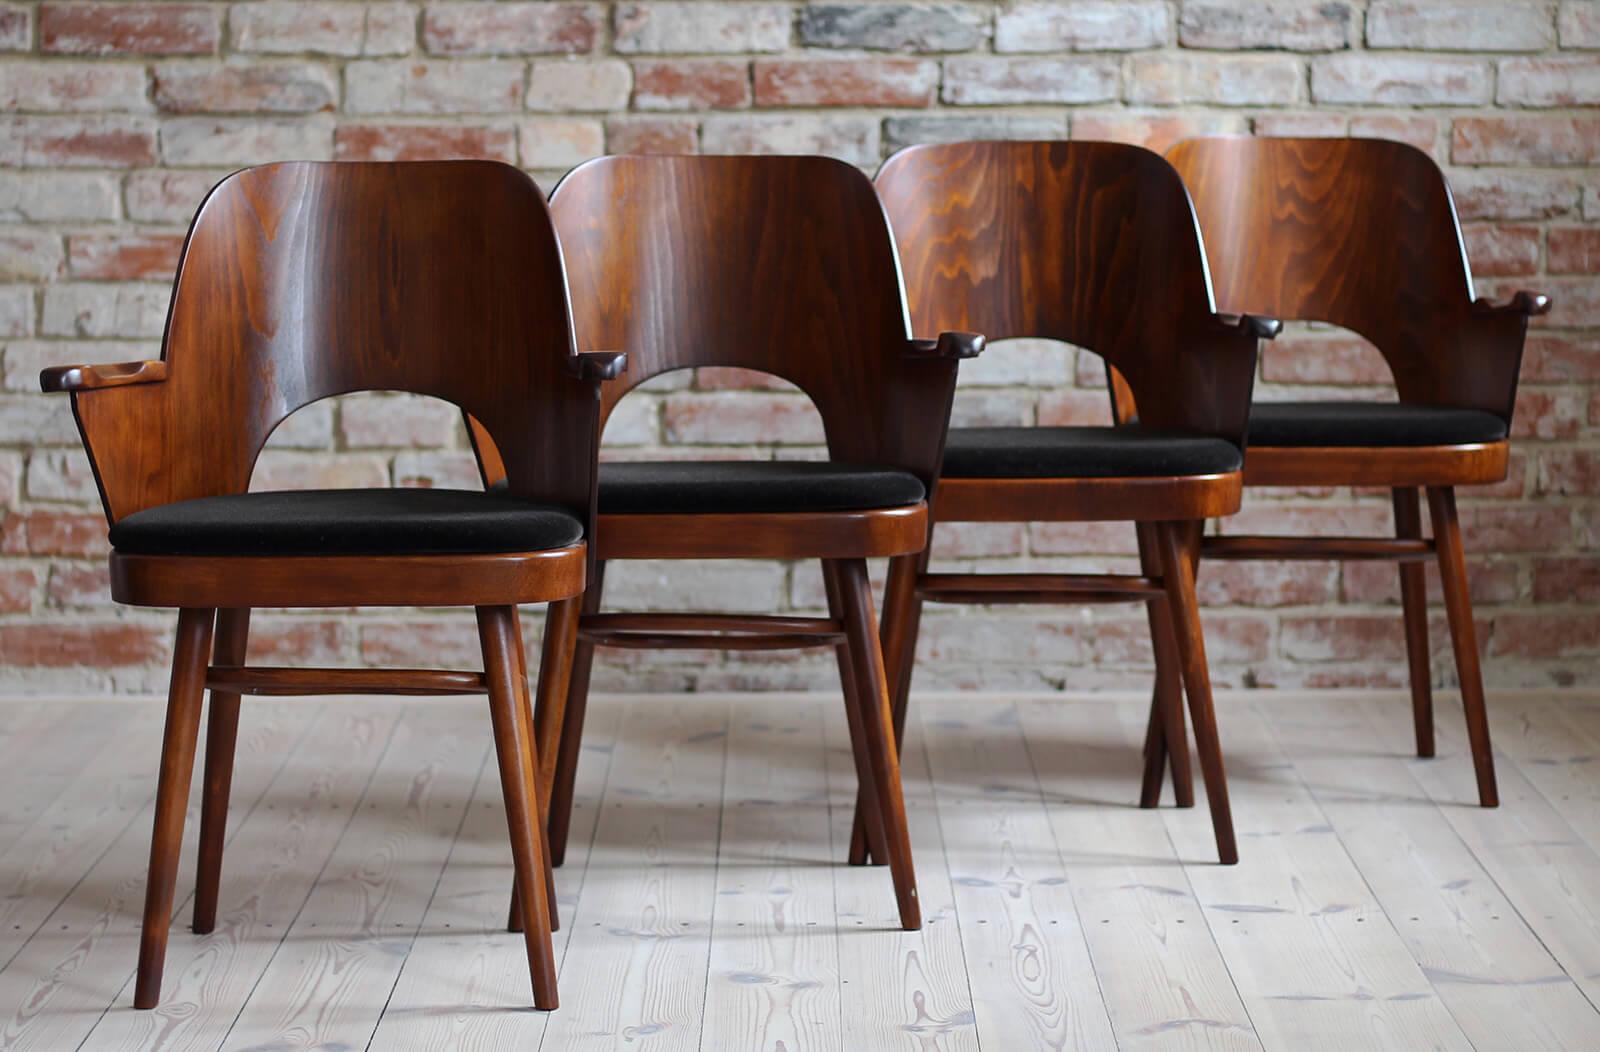 This set of four vintage dining chairs was designed by Lubomir Hofmann around 1950s, famous Czech designer who was closely associated with the Thonet brand. The chairs have been completely restored finished with high-quality lacquer that protects